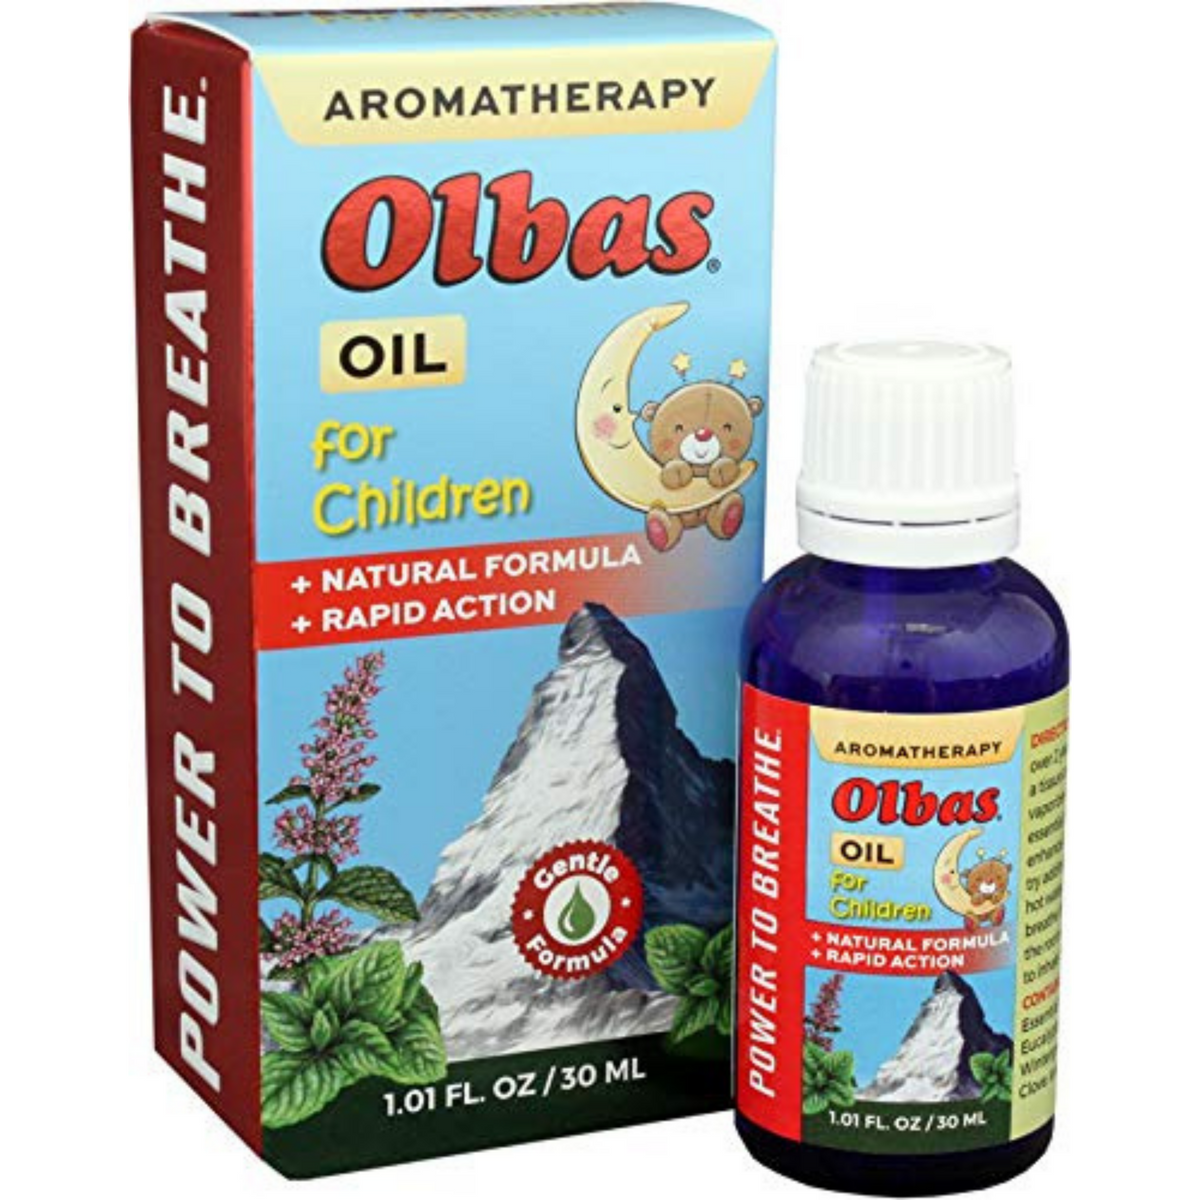 Primary Image of Olbas Oil For Children